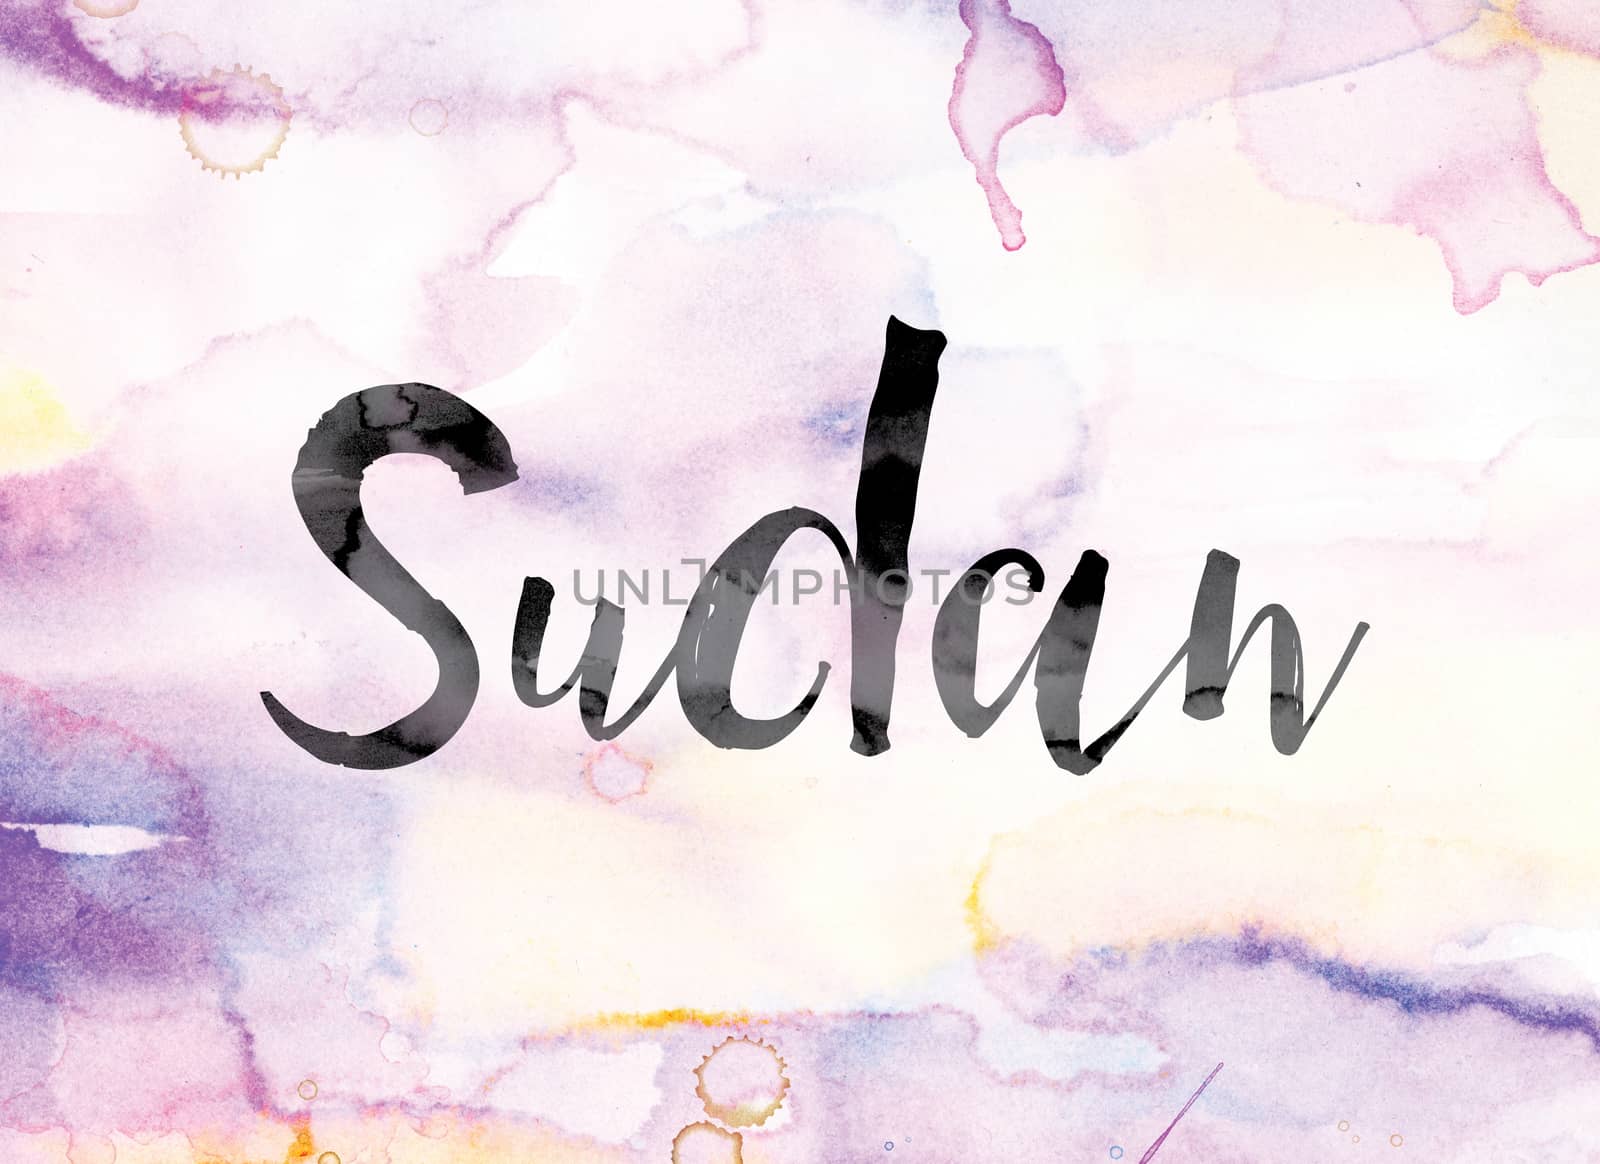 The word "Sudan" painted in black ink over a colorful watercolor washed background concept and theme.